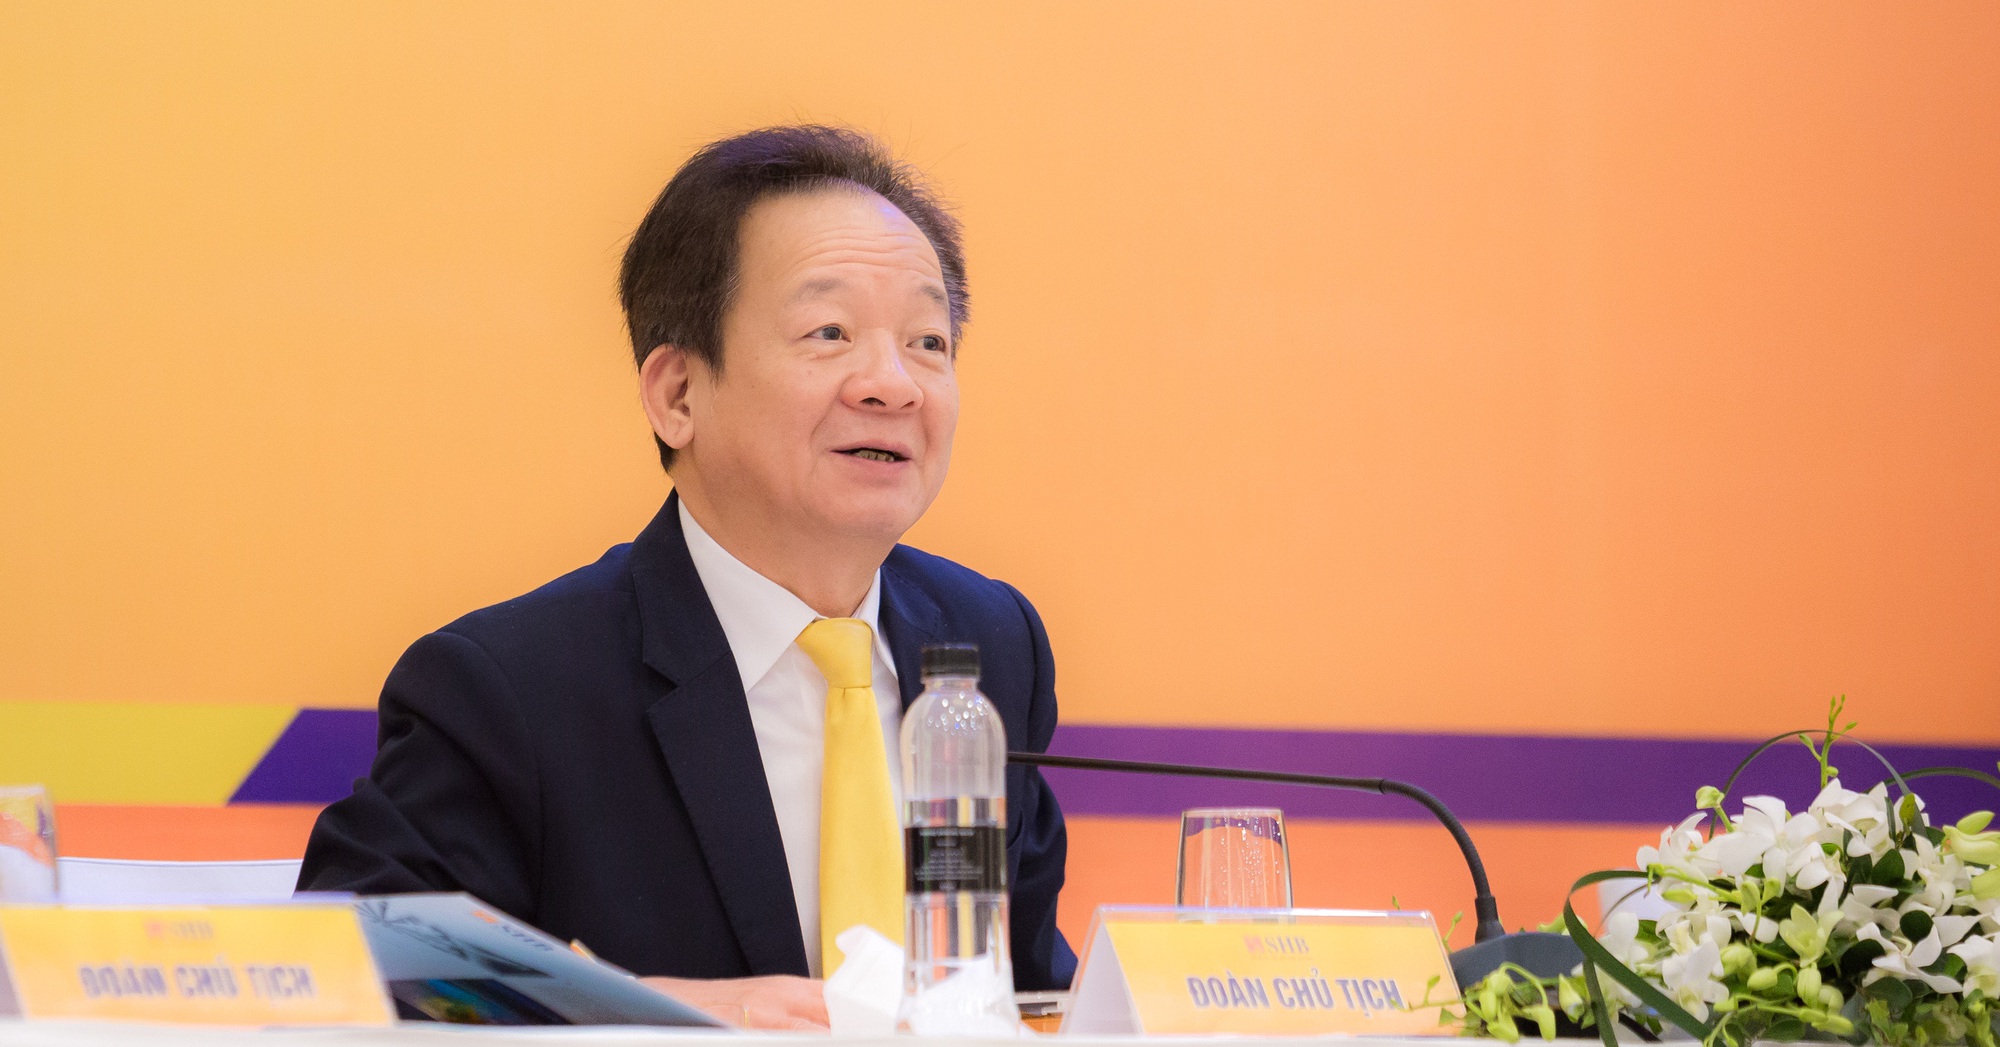 Mr. Do Quang Hien continues to hold the position of Chairman